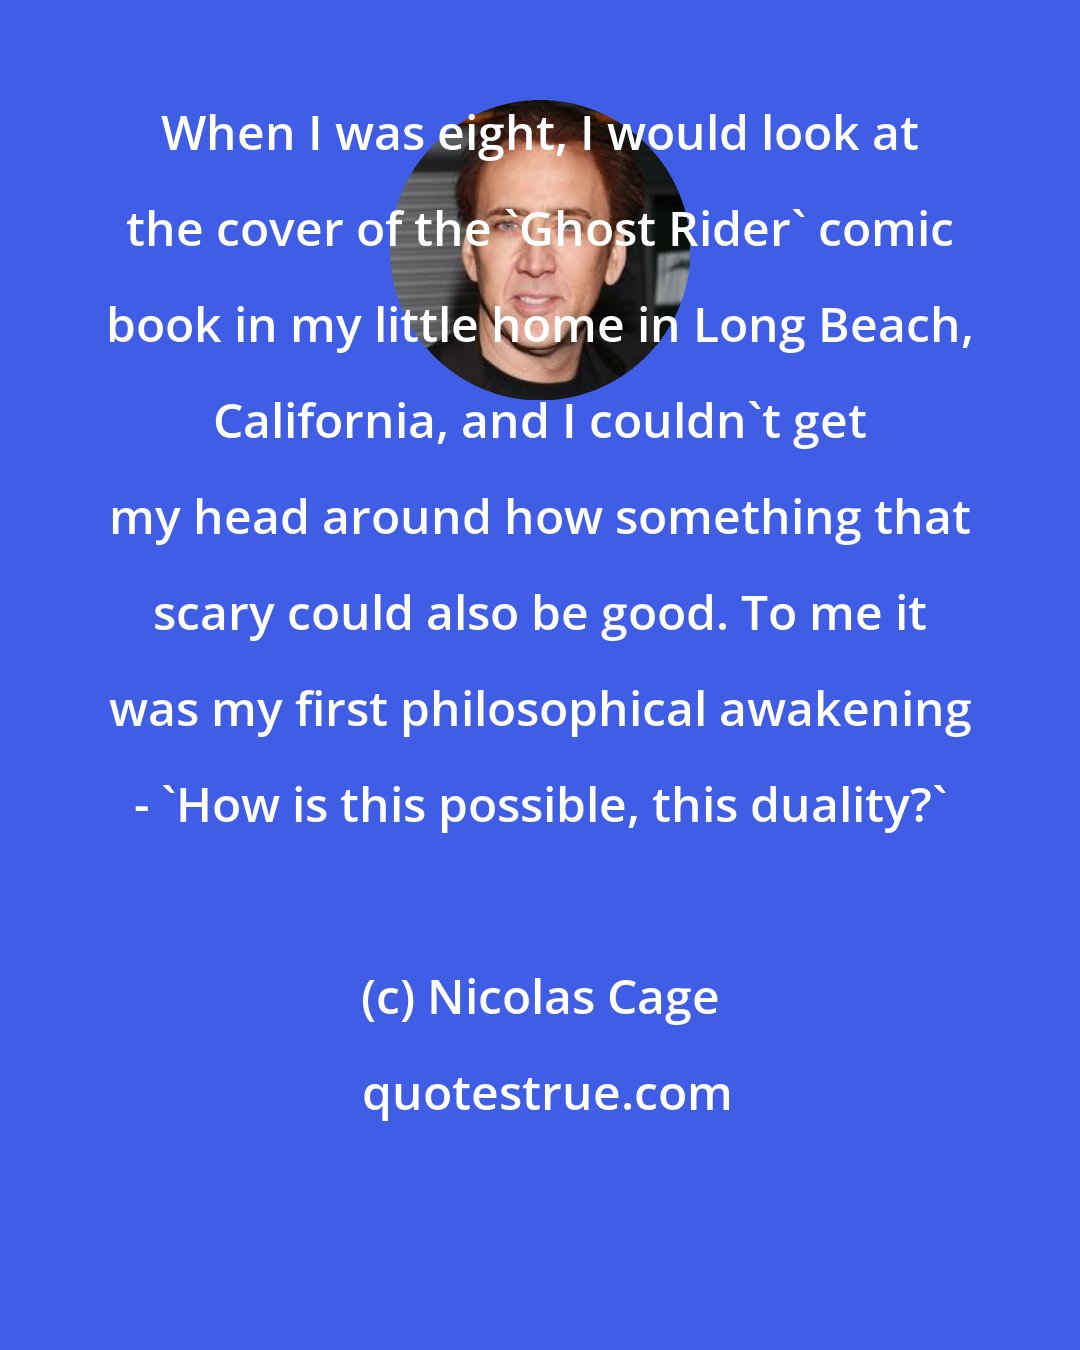 Nicolas Cage: When I was eight, I would look at the cover of the 'Ghost Rider' comic book in my little home in Long Beach, California, and I couldn't get my head around how something that scary could also be good. To me it was my first philosophical awakening - 'How is this possible, this duality?'